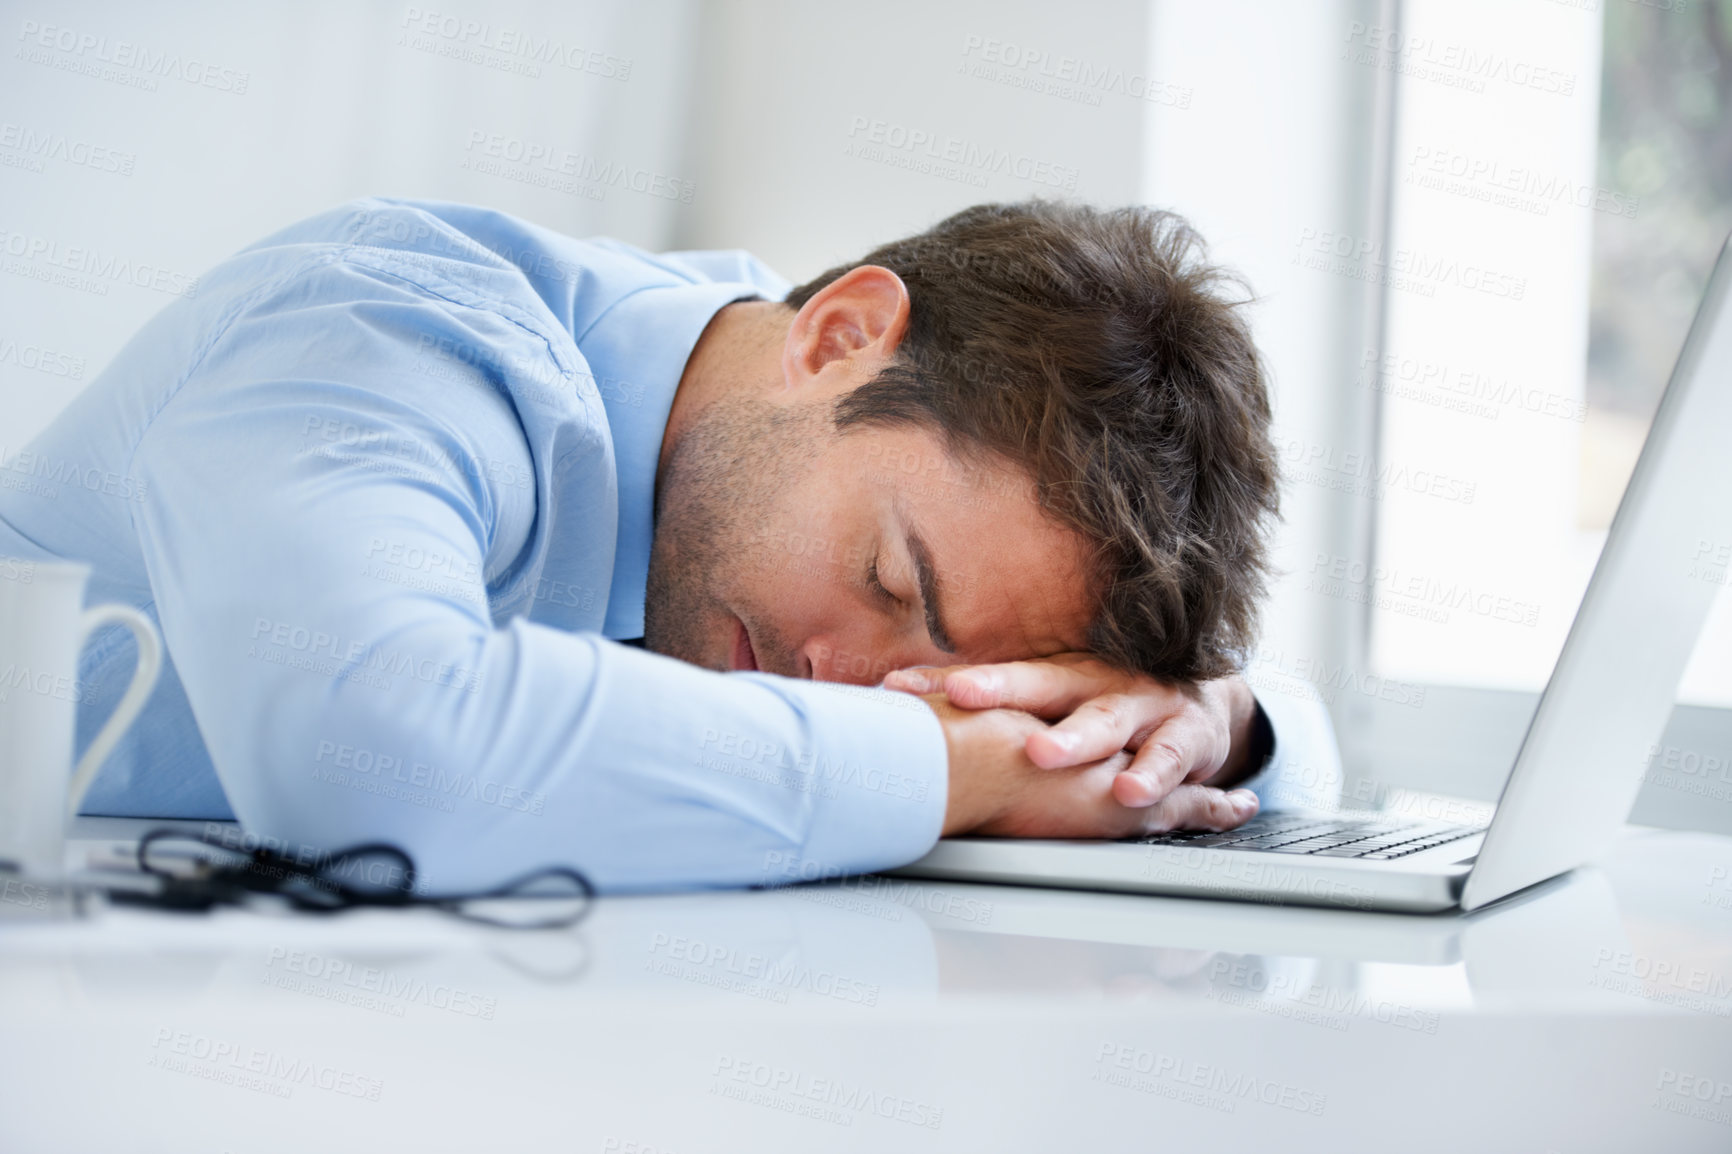 Buy stock photo Businessman, laptop and sleeping on office desk in burnout, stress or fatigue from pressure or overworked. Tired man or employee asleep on table with computer in mental health or anxiety at workplace